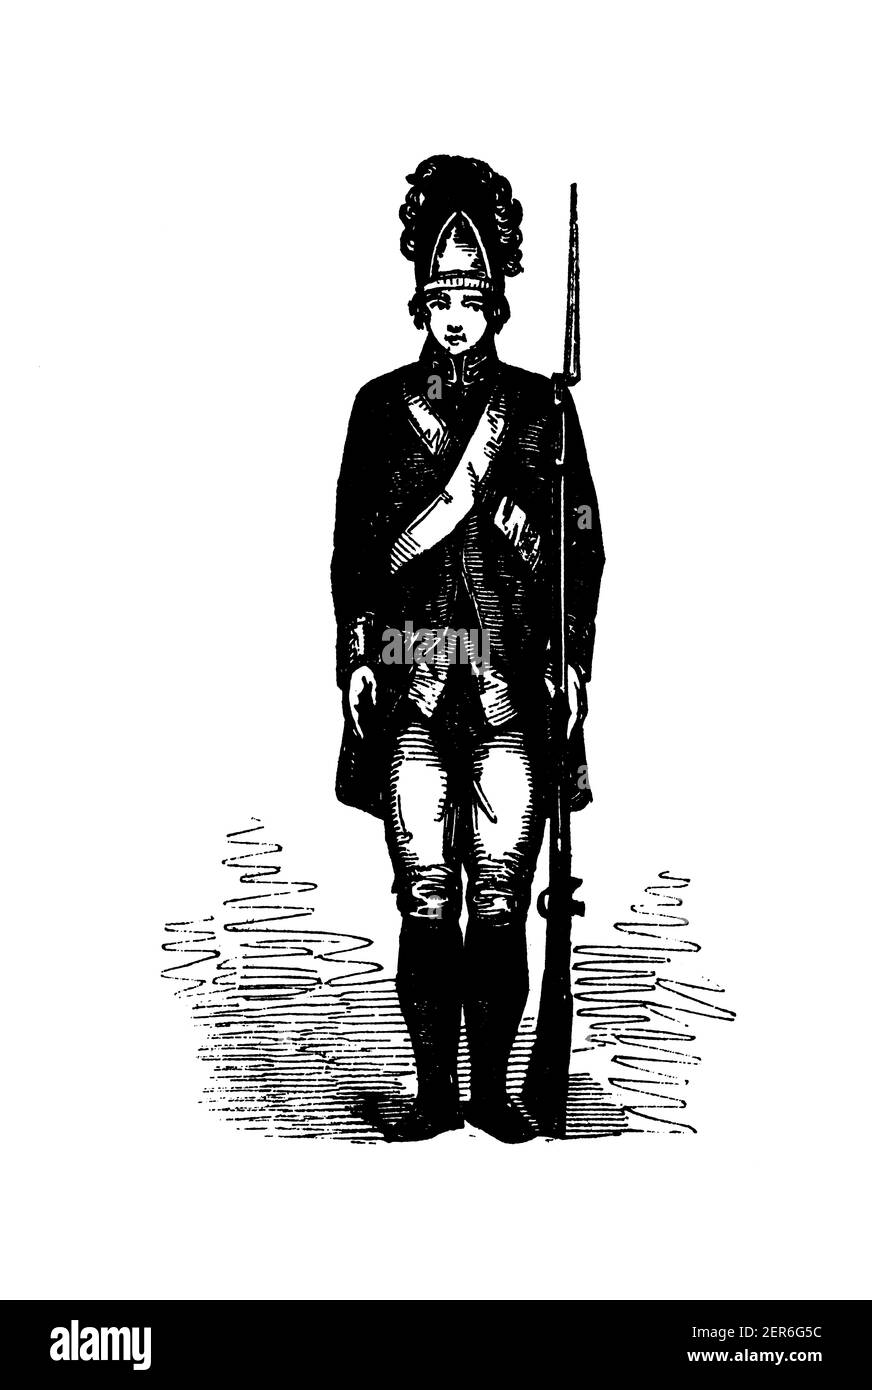 19th-century illustration of a grenadier at the time of George Washington, the first President of the United States of America. Engraving published in Stock Photo